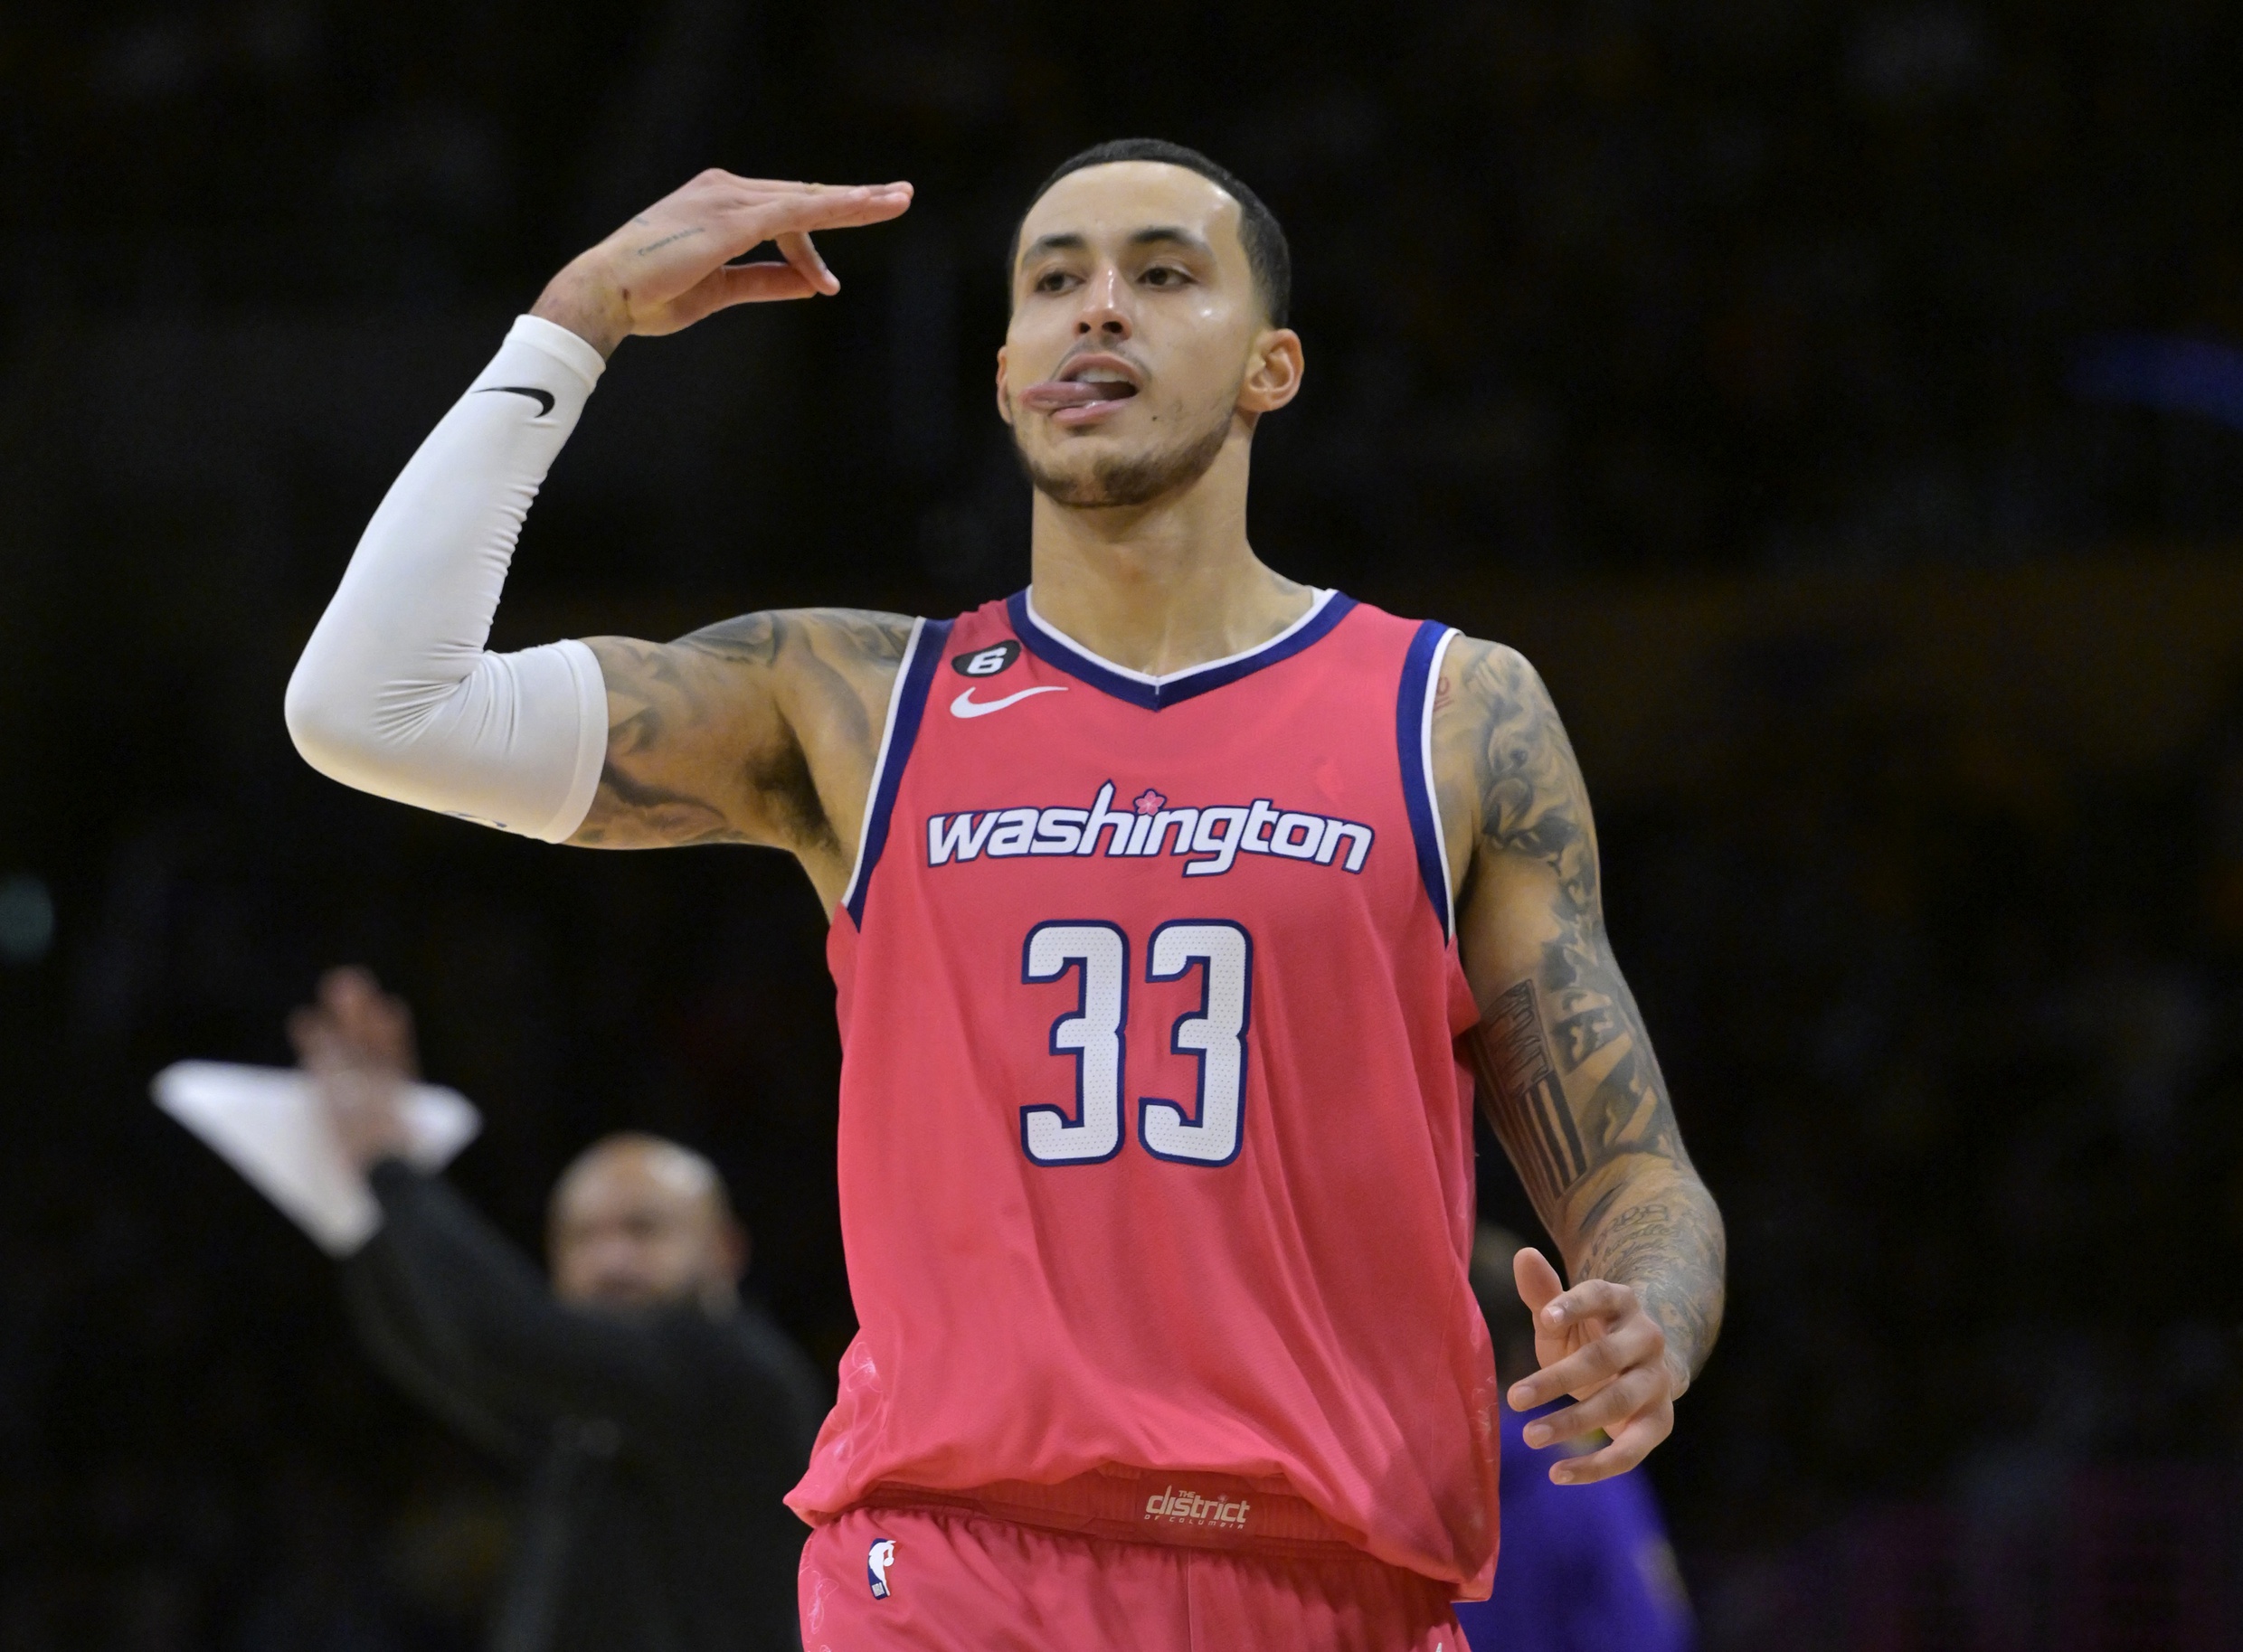 Dec 18, 2022; Los Angeles, California, USA; Washington Wizards forward Kyle Kuzma (33) signals after a 3 point basket in the second half against the Los Angeles Lakers at Crypto.com Arena. Mandatory Credit: Jayne Kamin-Oncea-USA TODAY Sports